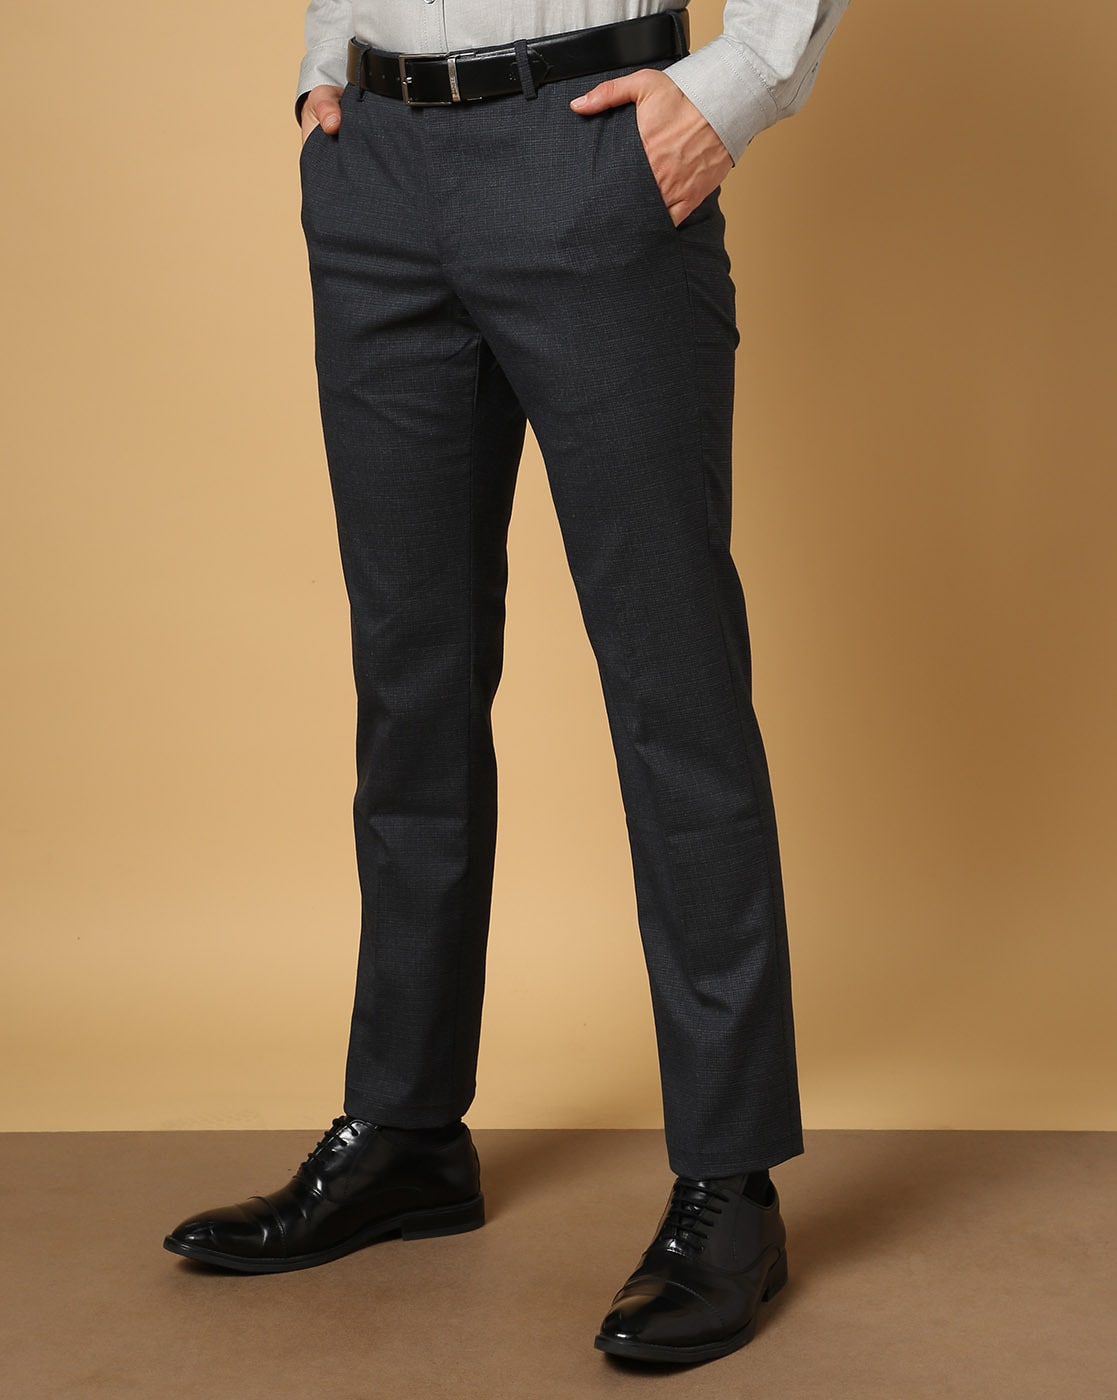 John_player Navy Blue Flat Front Formal Trousers 136846.html - Buy  John_player Navy Blue Flat Front Formal Trousers 136846.html online in India